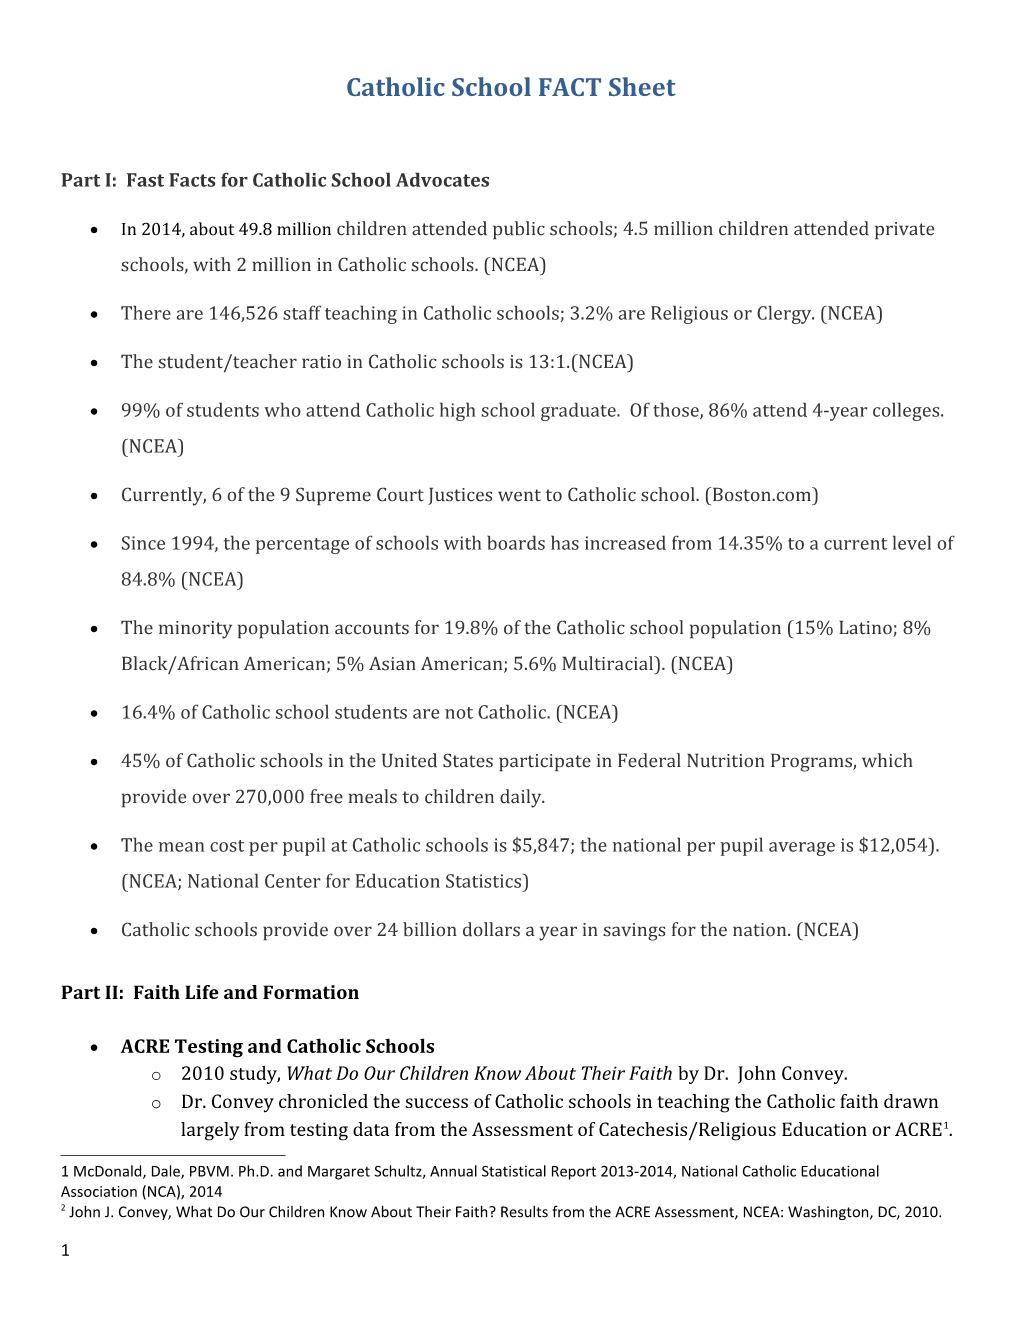 Part I: Fast Facts for Catholic School Advocates